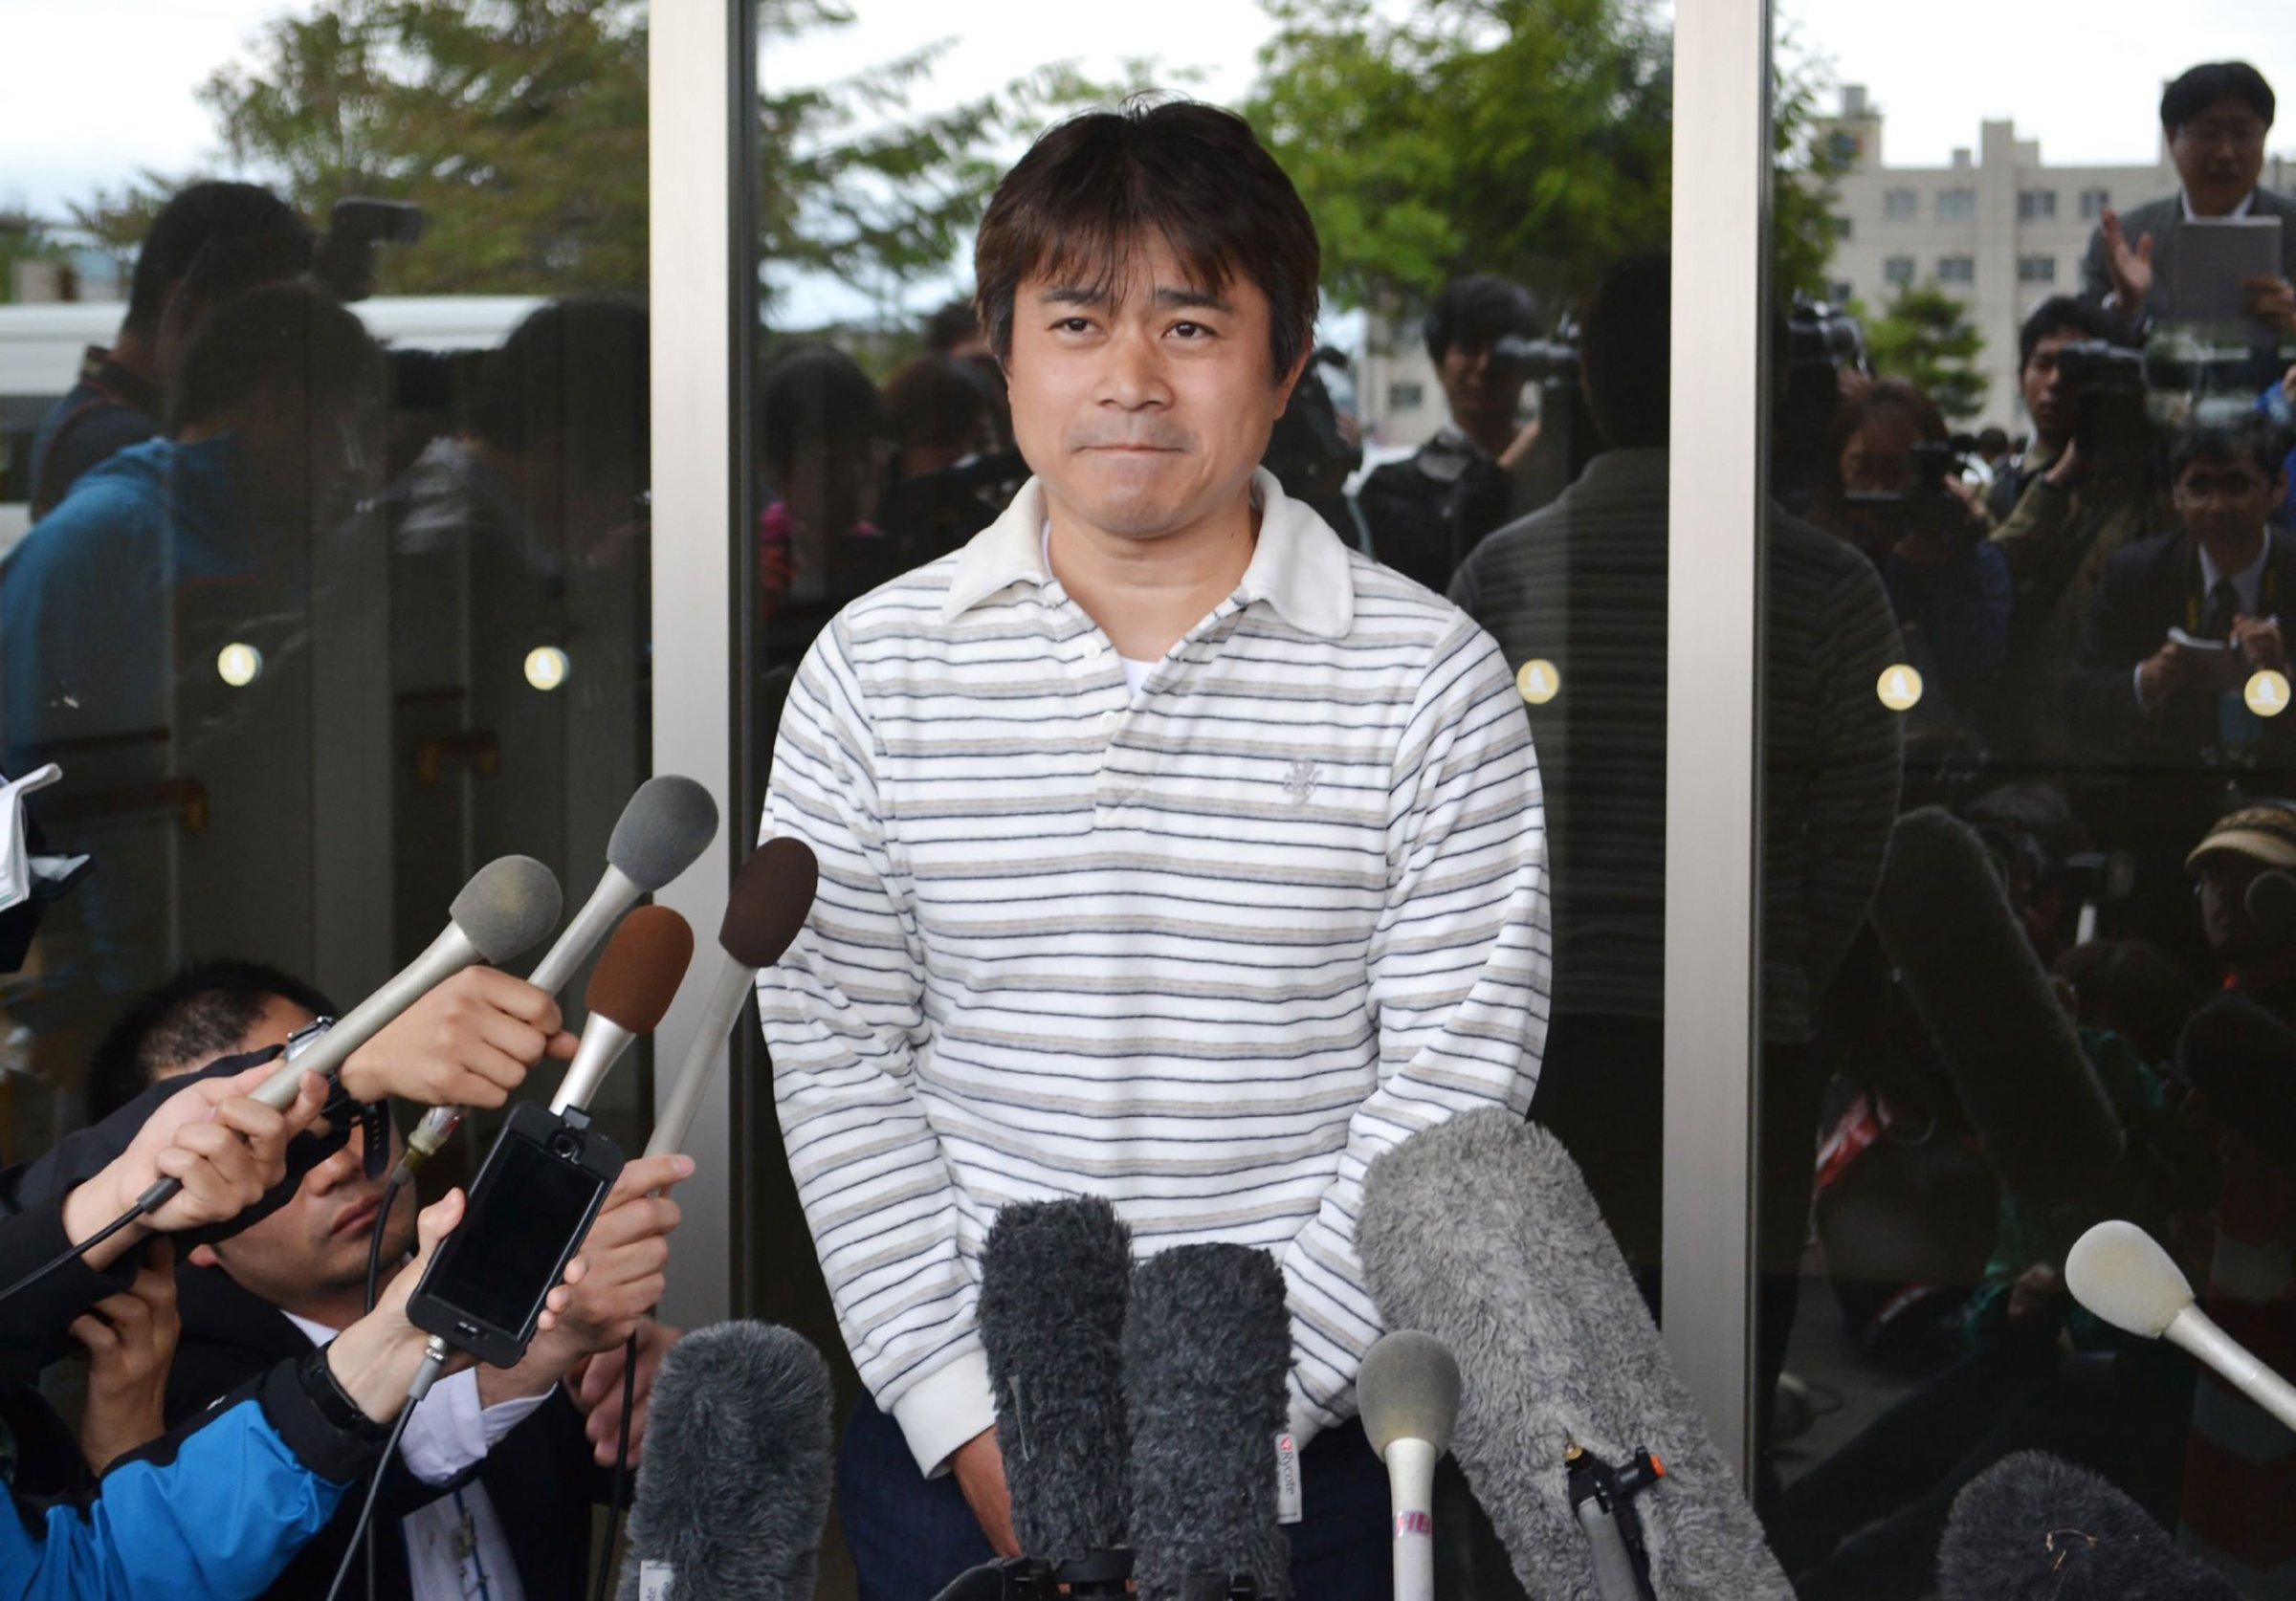 Father of Yamato Tanooka, a seven-year-old boy missing since being abandoned in a bear-inhabited forest in northern Japan, speaks to reporters in Hakodate on June 3, 2016.